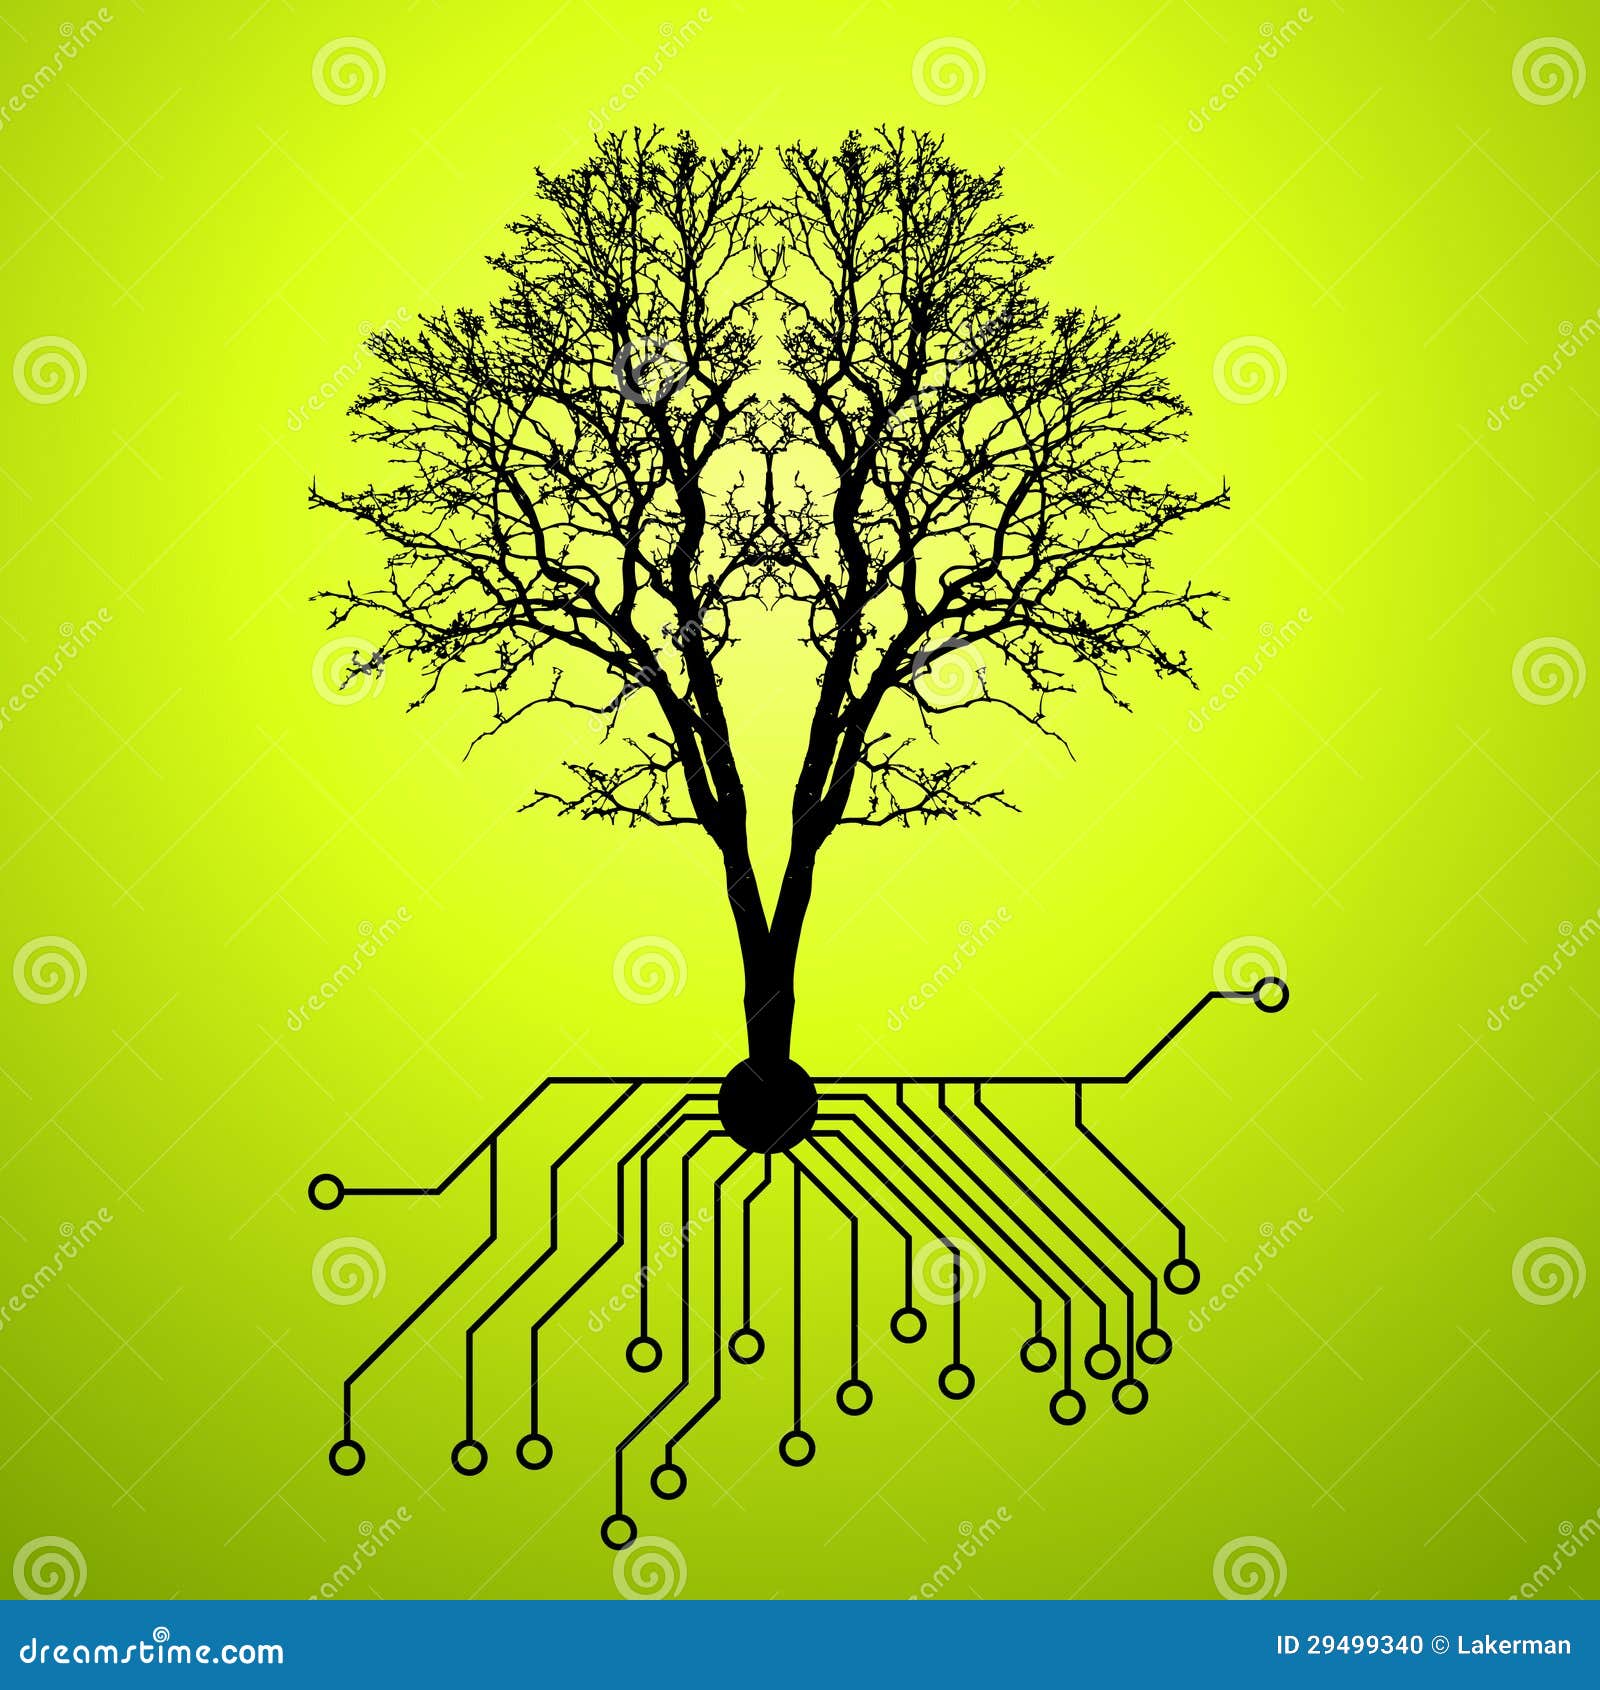 Technology and Nature Synthesis Stock Illustration Illustration of concept, light: 29499340